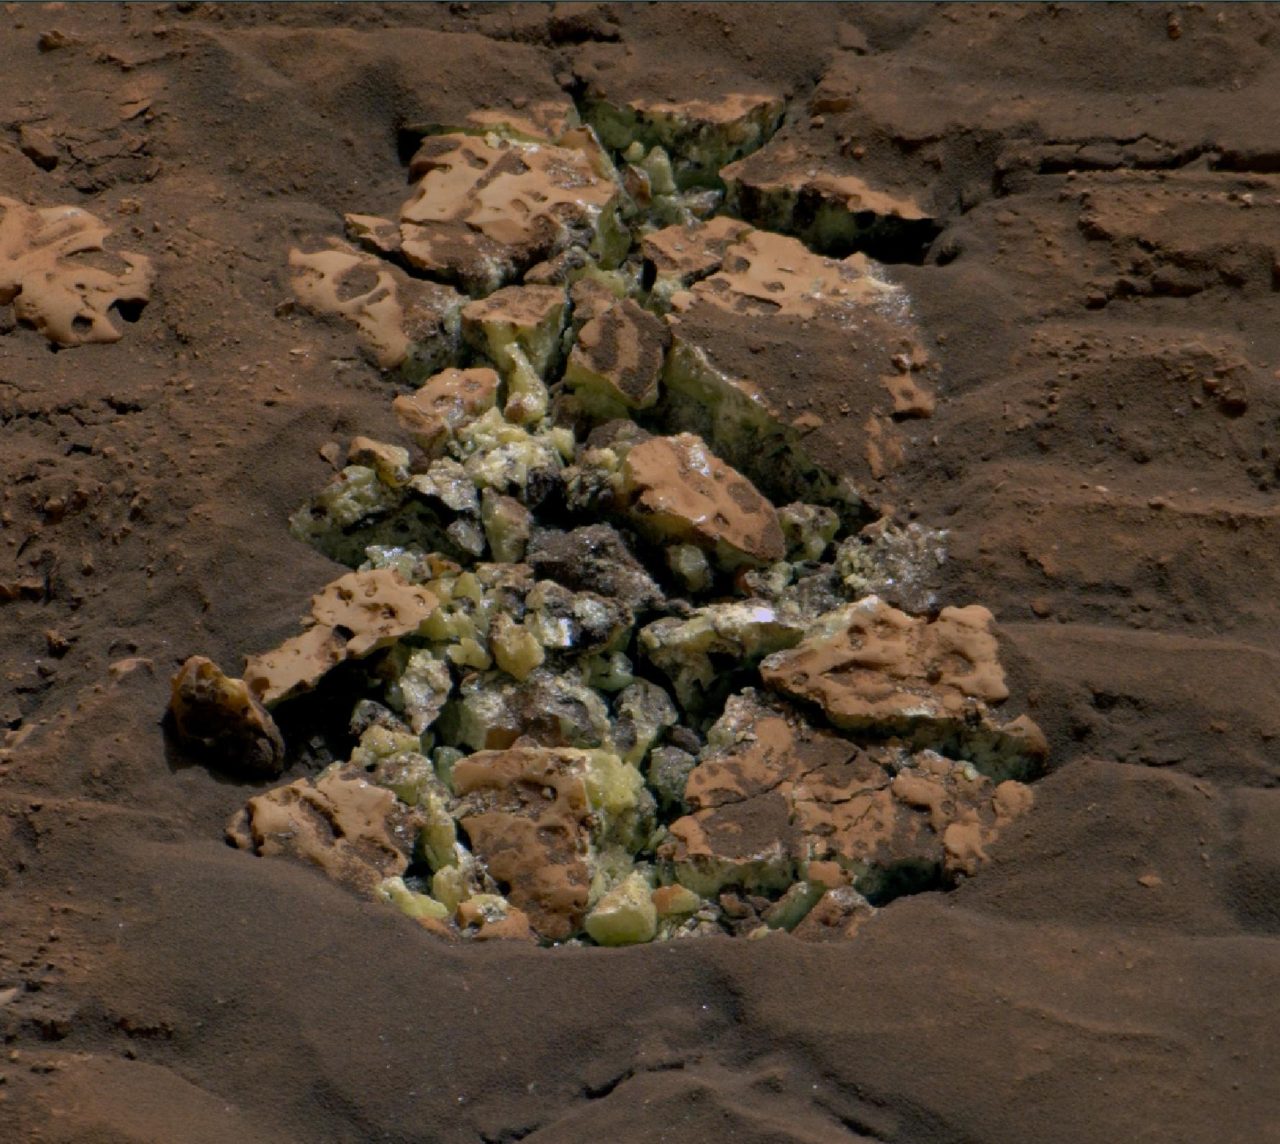 NASA's Mars Curiosity rover discovers rock made of pure sulfur crystals |